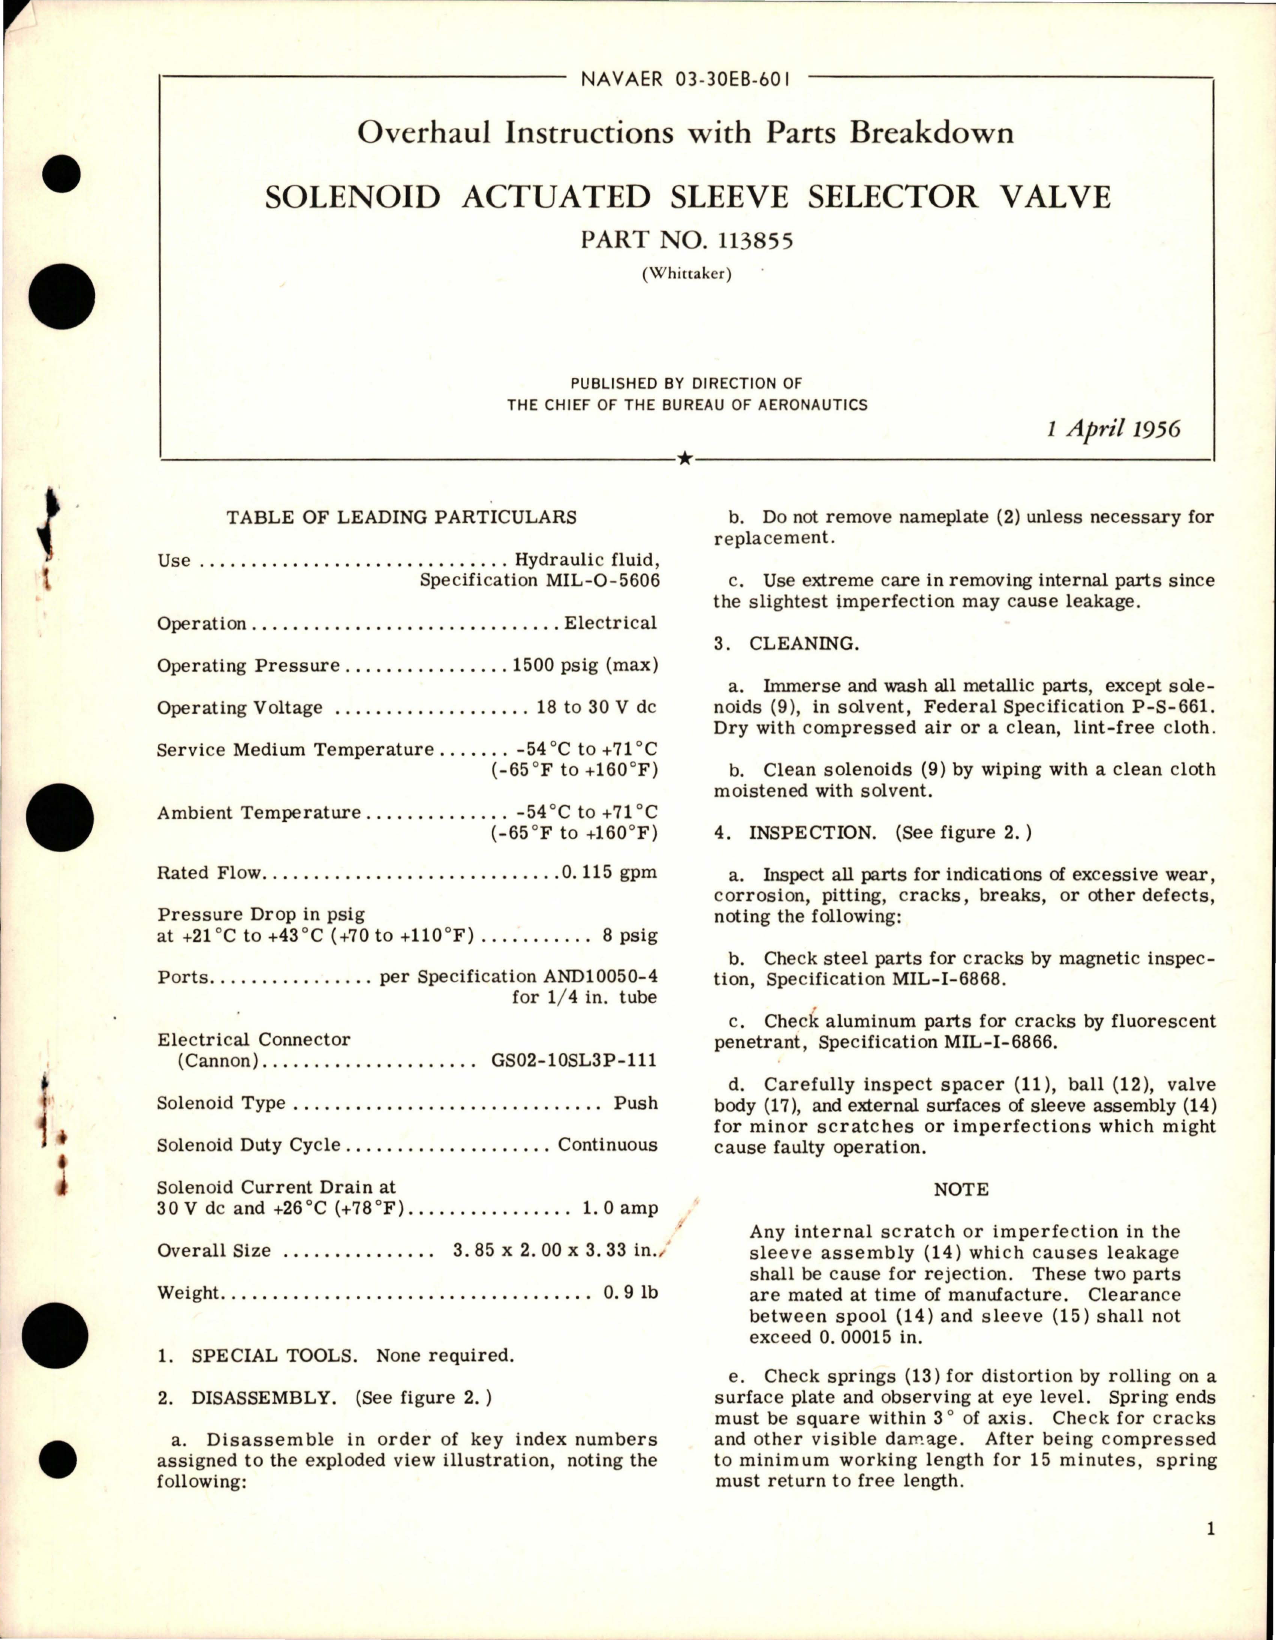 Sample page 1 from AirCorps Library document: Overhaul Instructions with Parts for Solenoid Actuated Sleeve Selector Valve - Part 113855